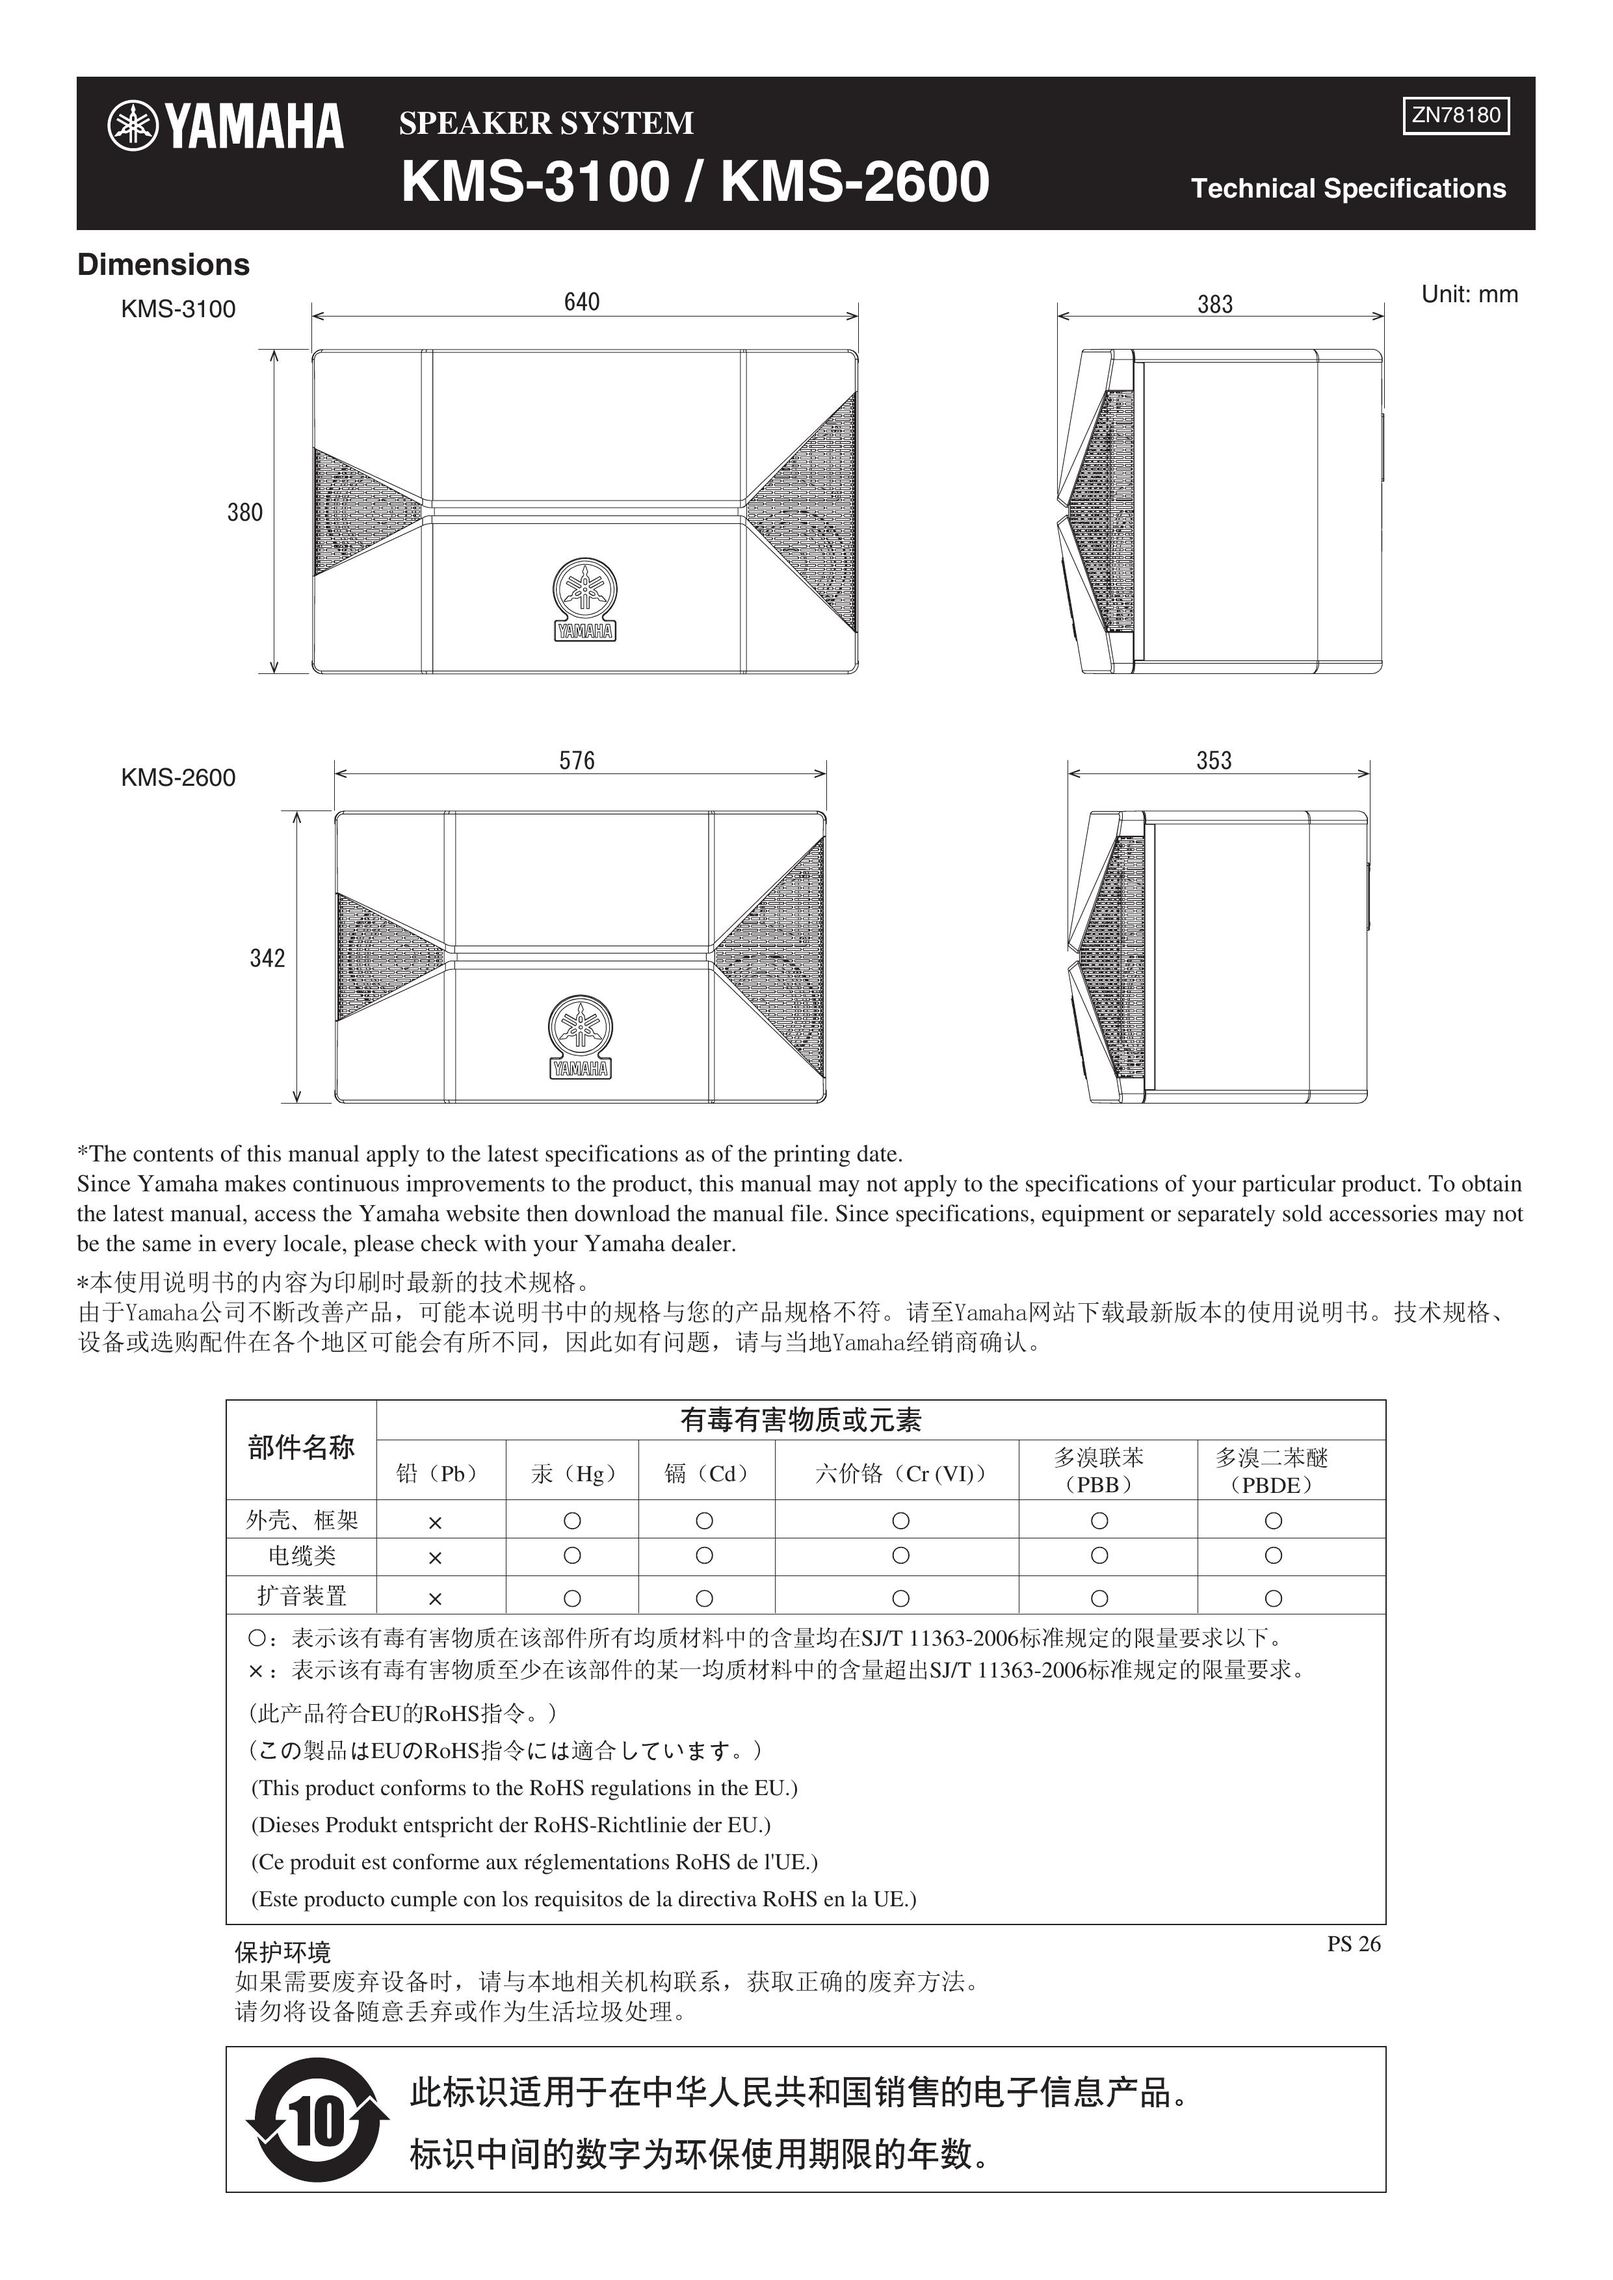 Yamaha KMS-3100 Home Theater System User Manual